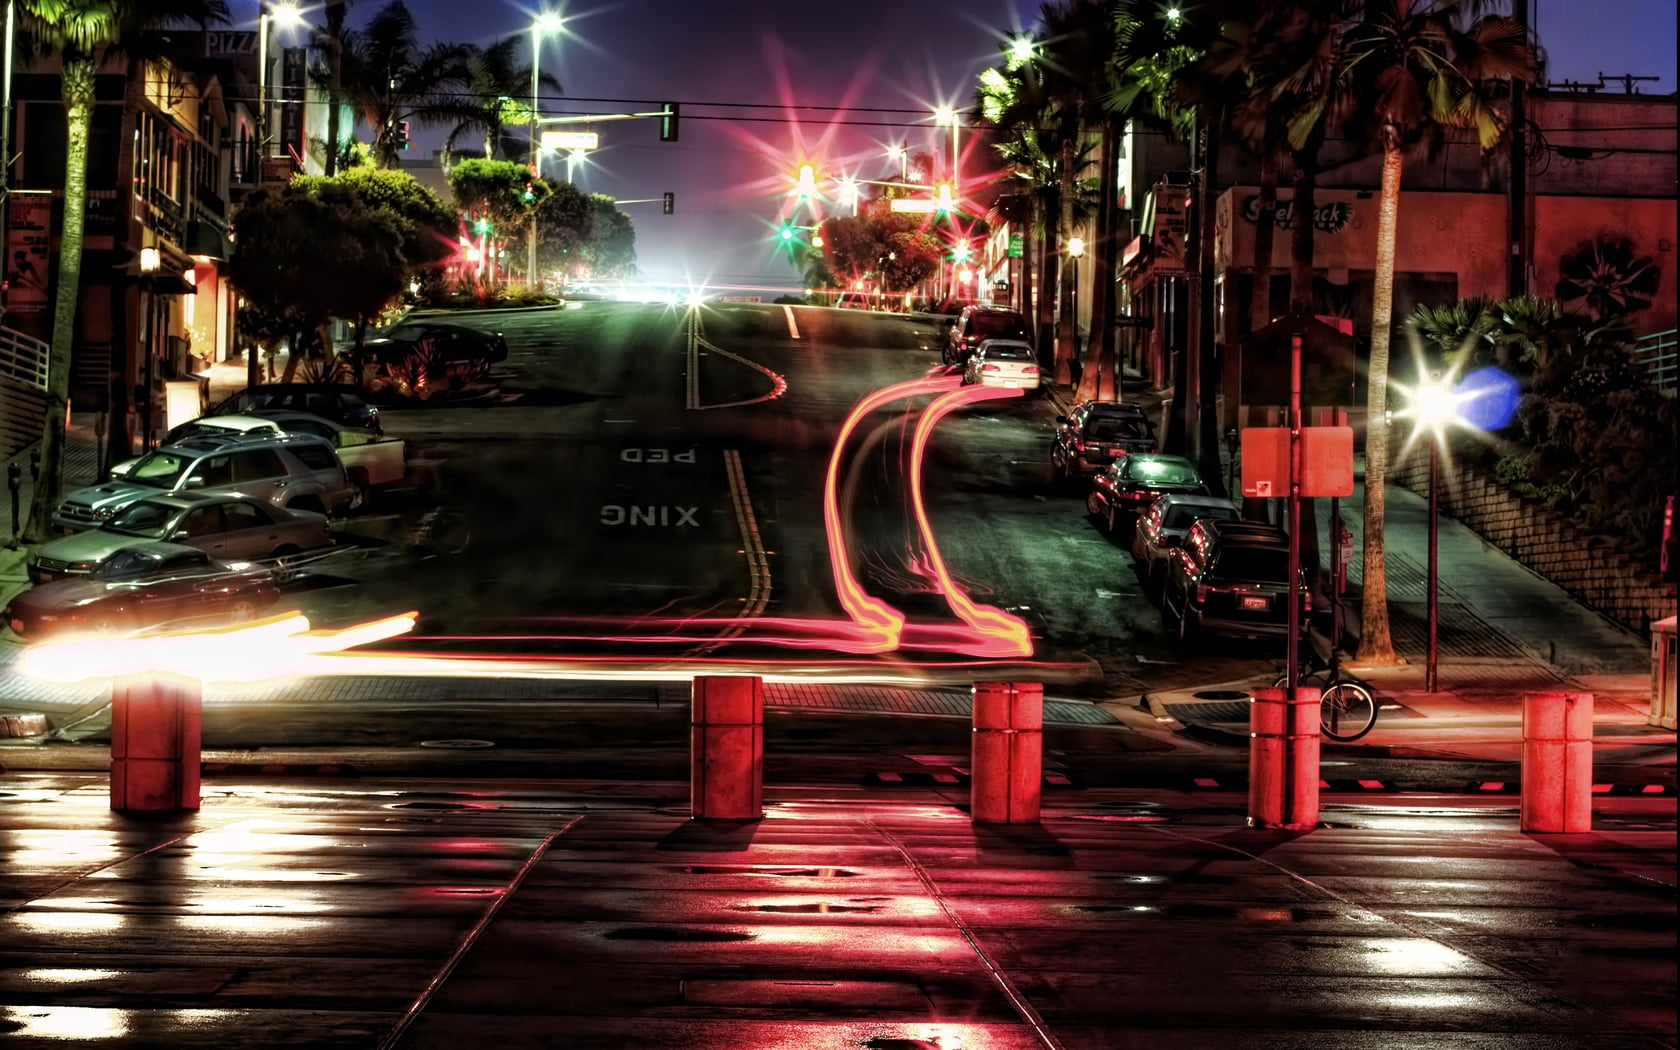 timelapse photography of road, city, houses, cars, street, megapolis